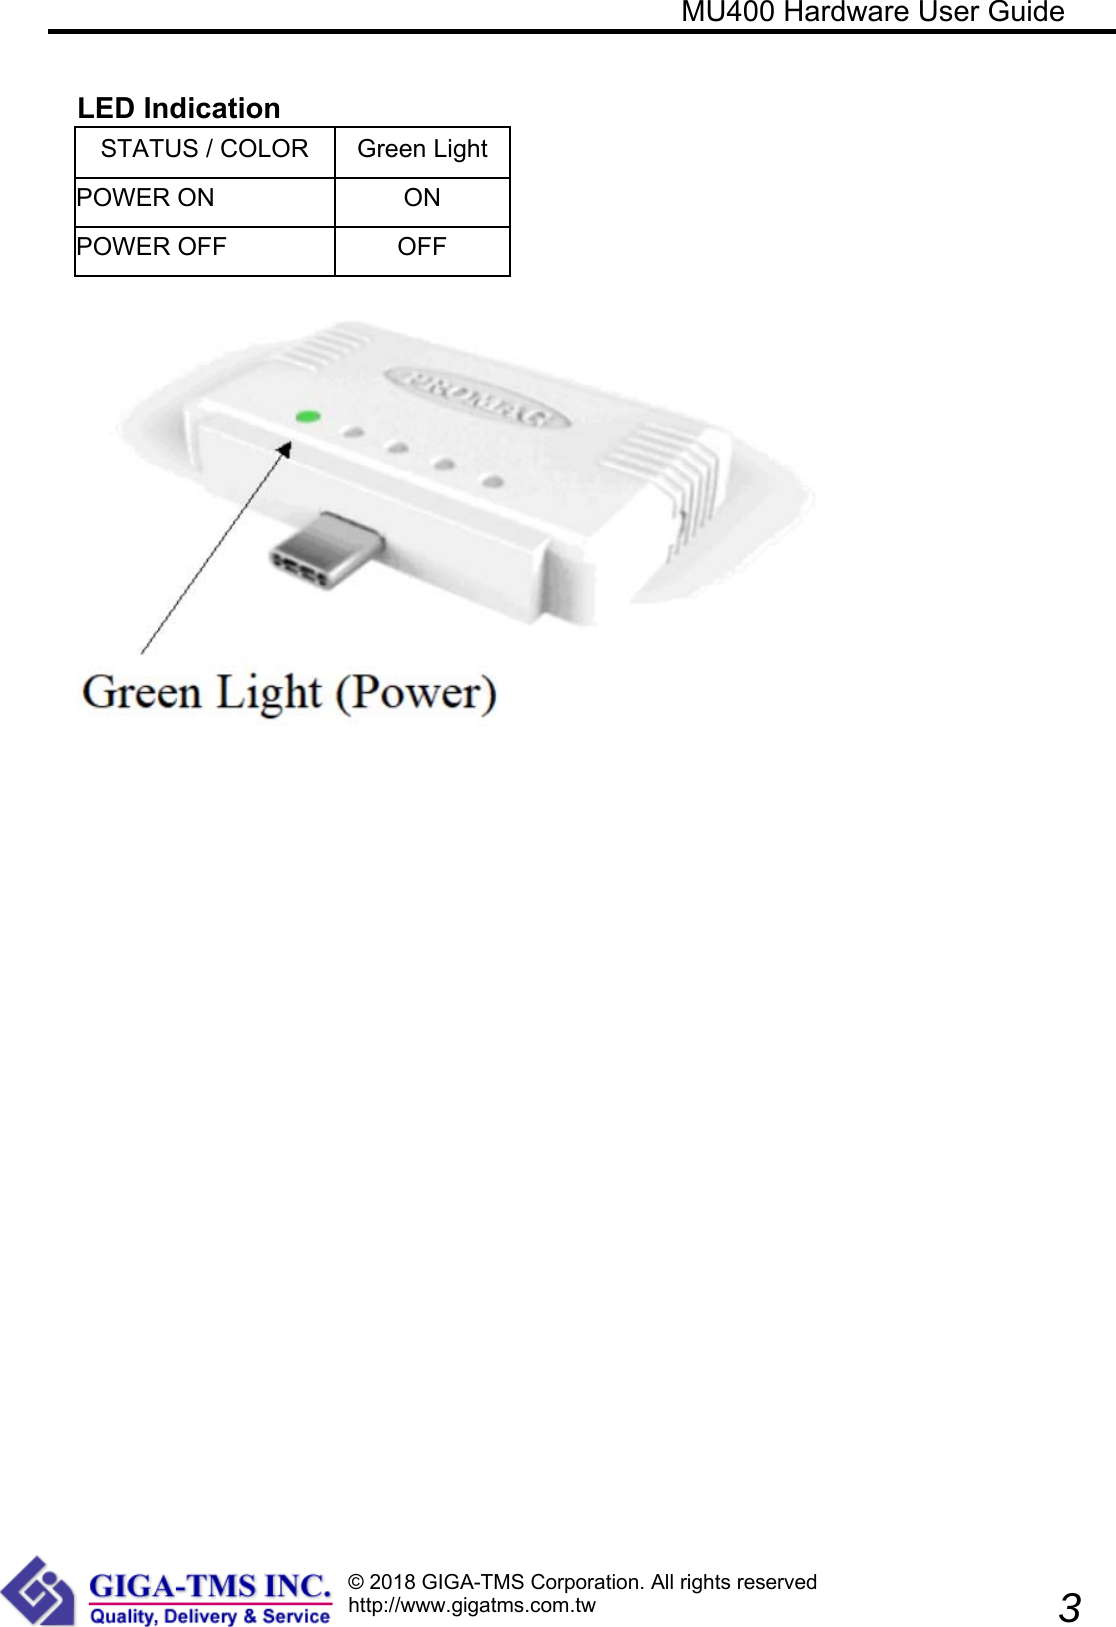 © 2018 GIGA-TMS Corporation. All rights reservedhttp://www.gigatms.com.tw                                                            MU400 Hardware User Guide               3  LED Indication STATUS / COLOR  Green Light POWER ON  ON POWER OFF  OFF        